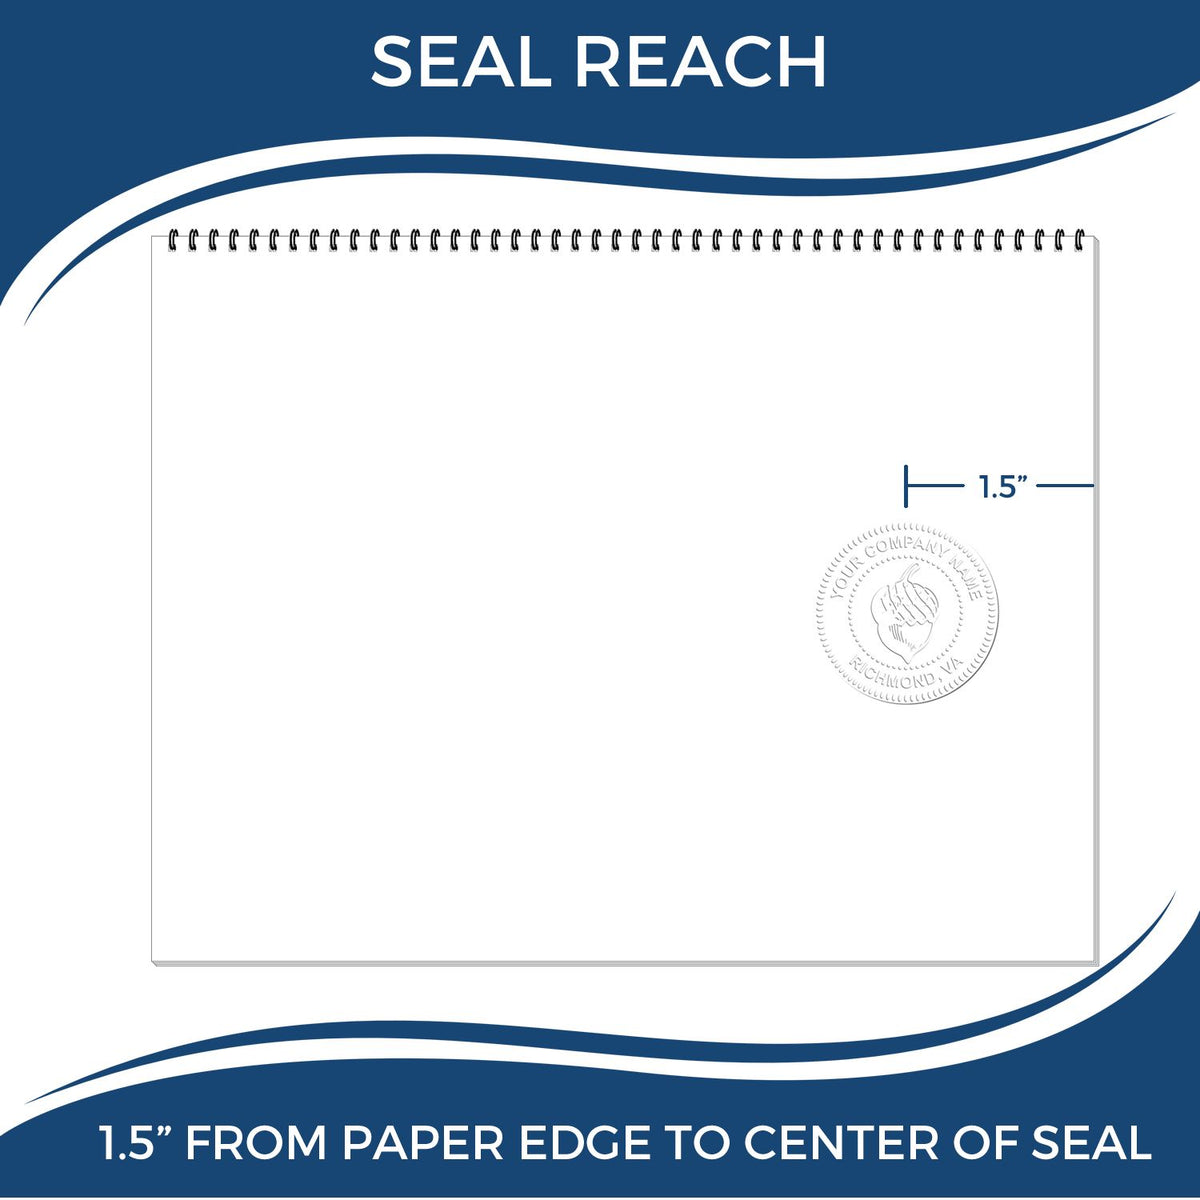 An infographic showing the seal reach which is represented by a ruler and a miniature seal image of the Handheld District of Columbia Professional Engineer Embosser